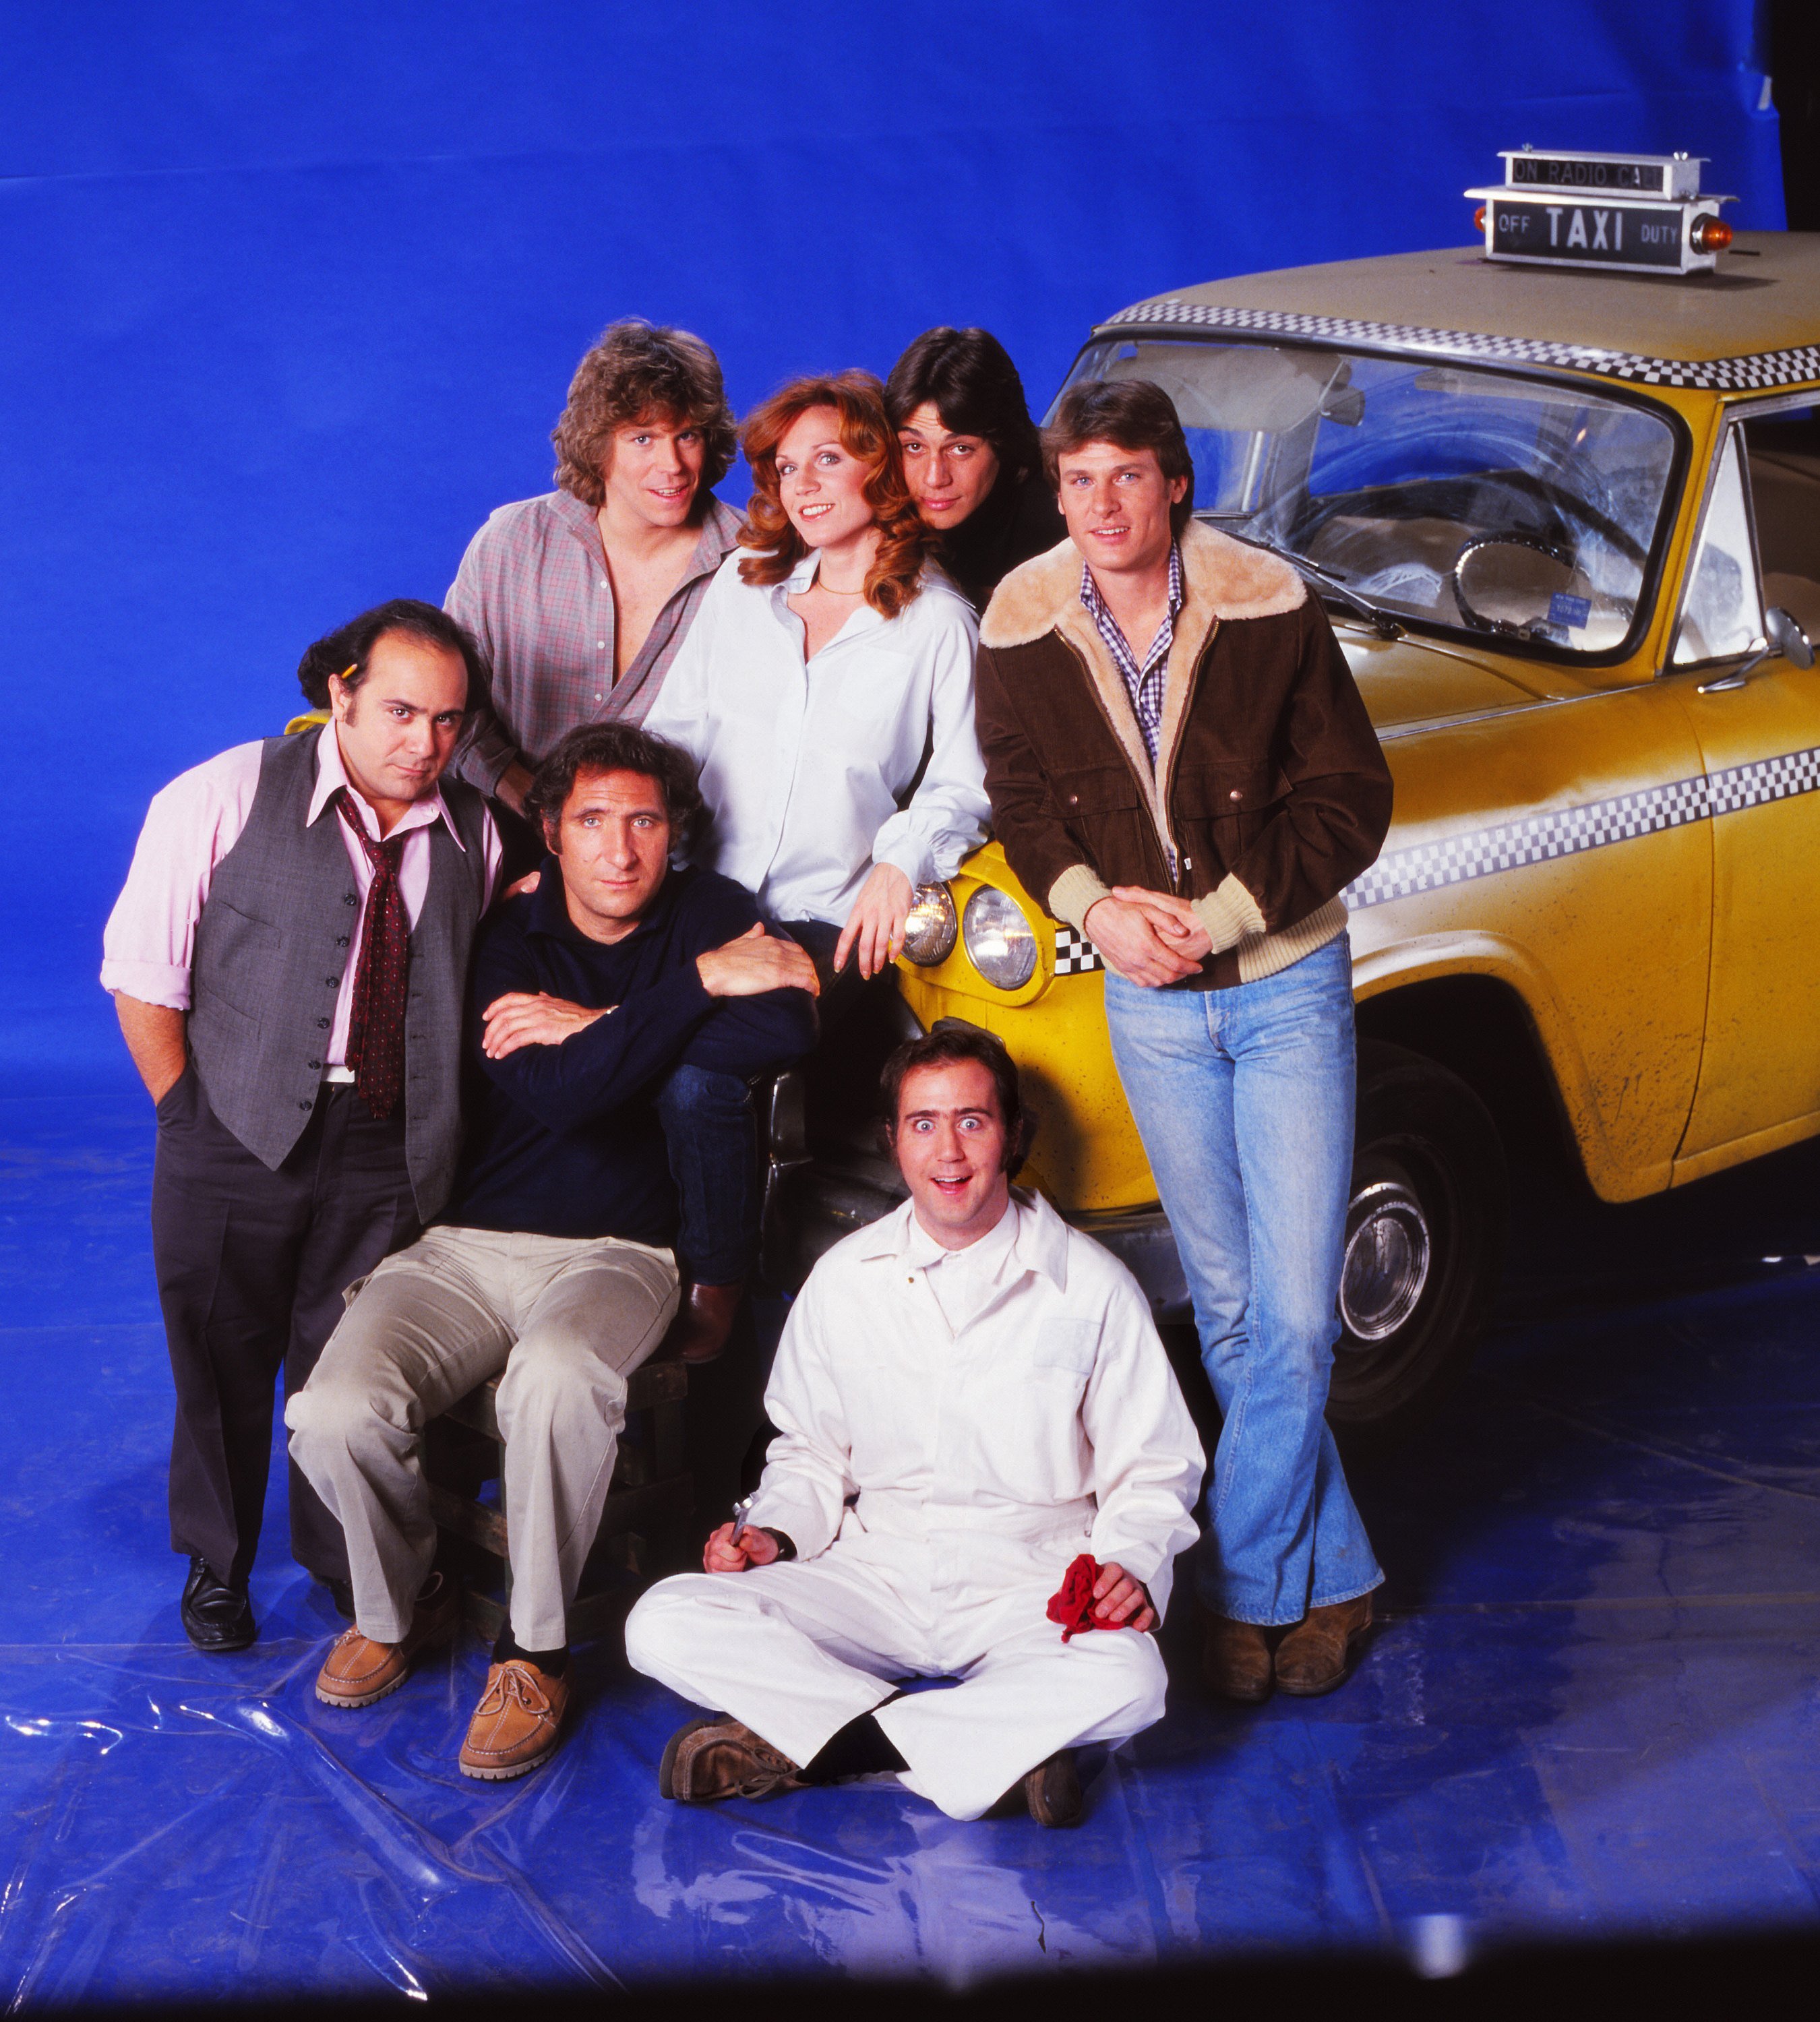 The cast of the TV series "Taxi" in Los Angeles, California in 1979. | Source: Getty Images